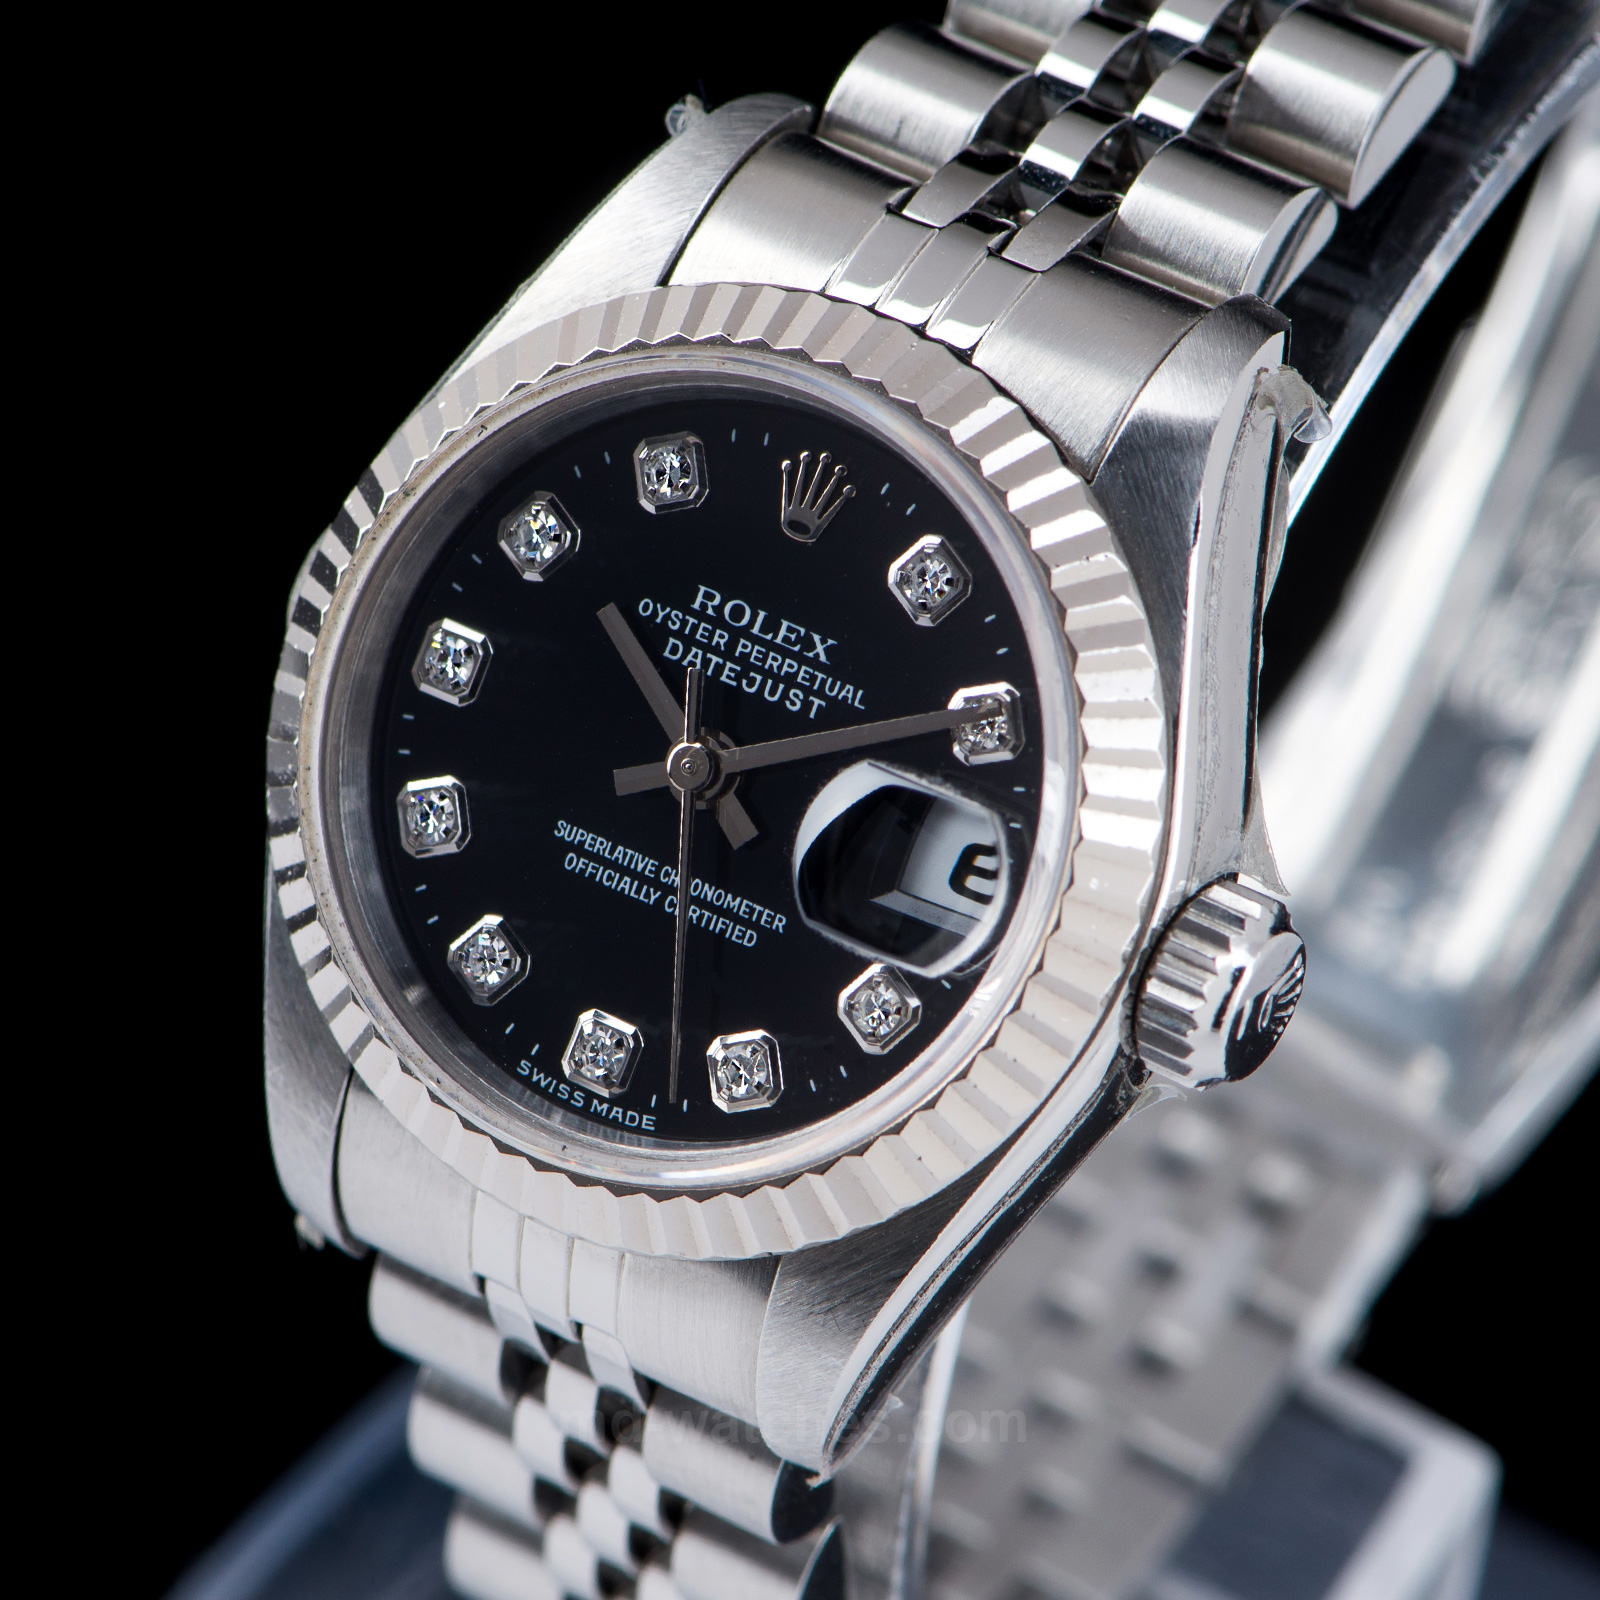 rolex oyster perpetual datejust superlative chronometer officially certified with diamonds